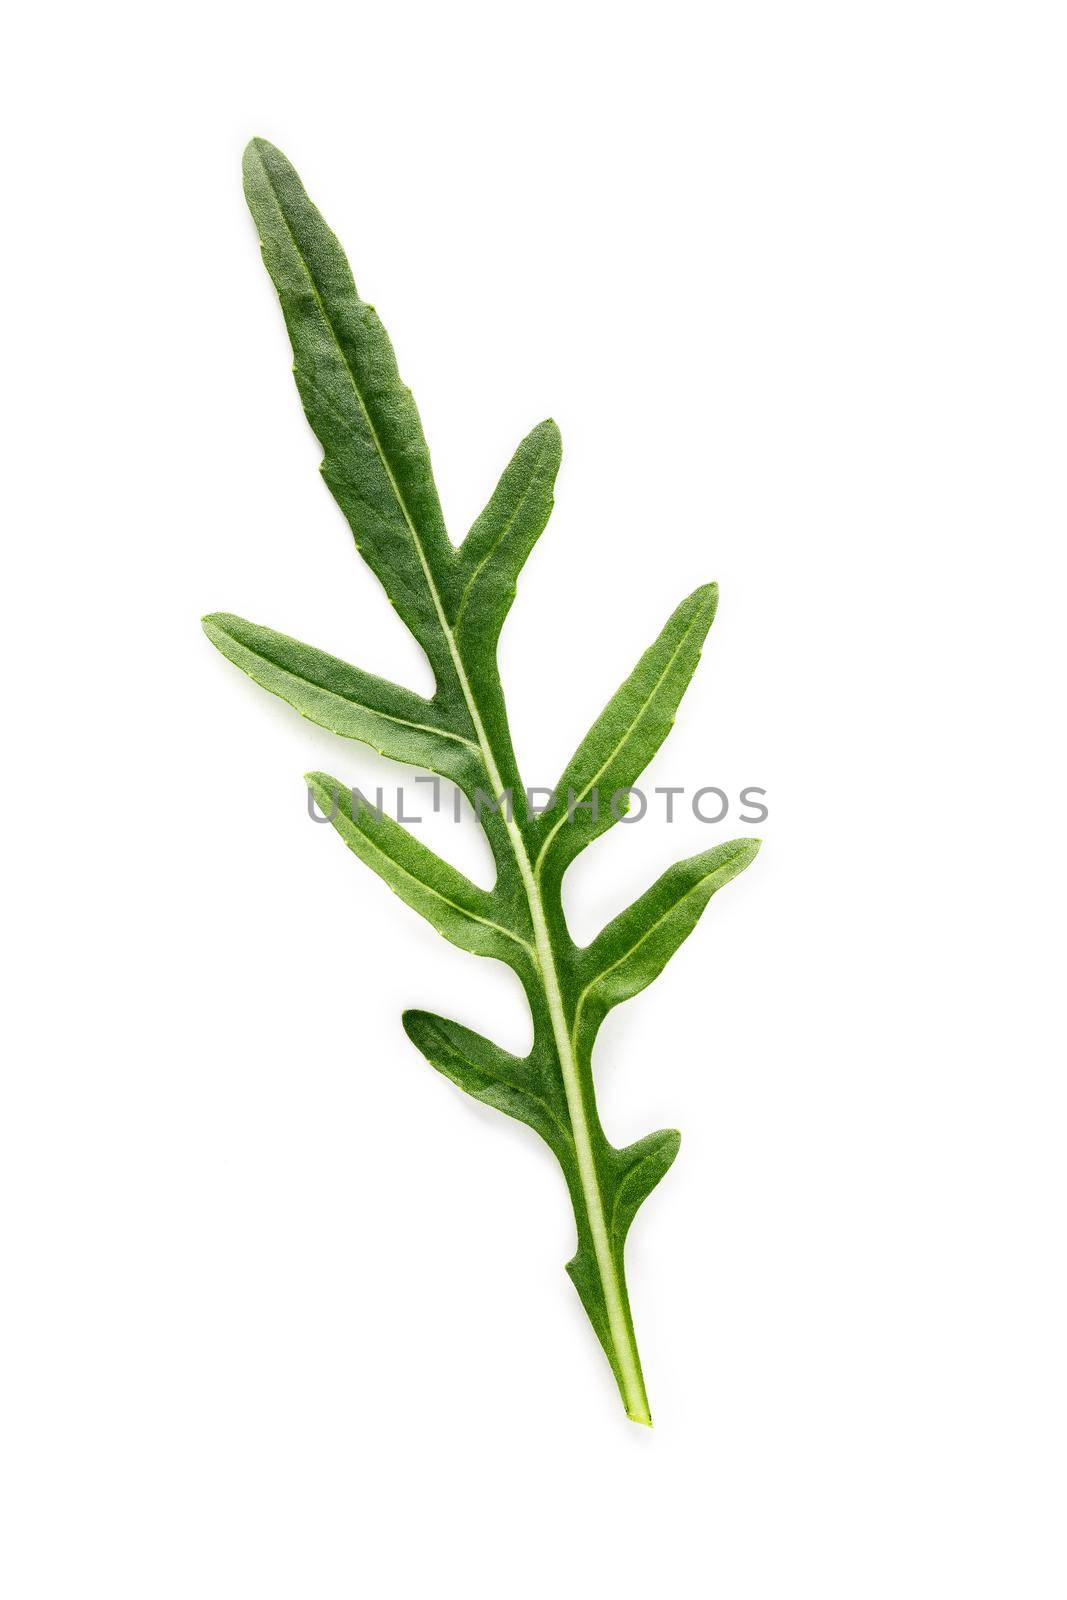 Arugula leaves isolated on white background. Closeup fresh wild rocket leaves on white background top view.